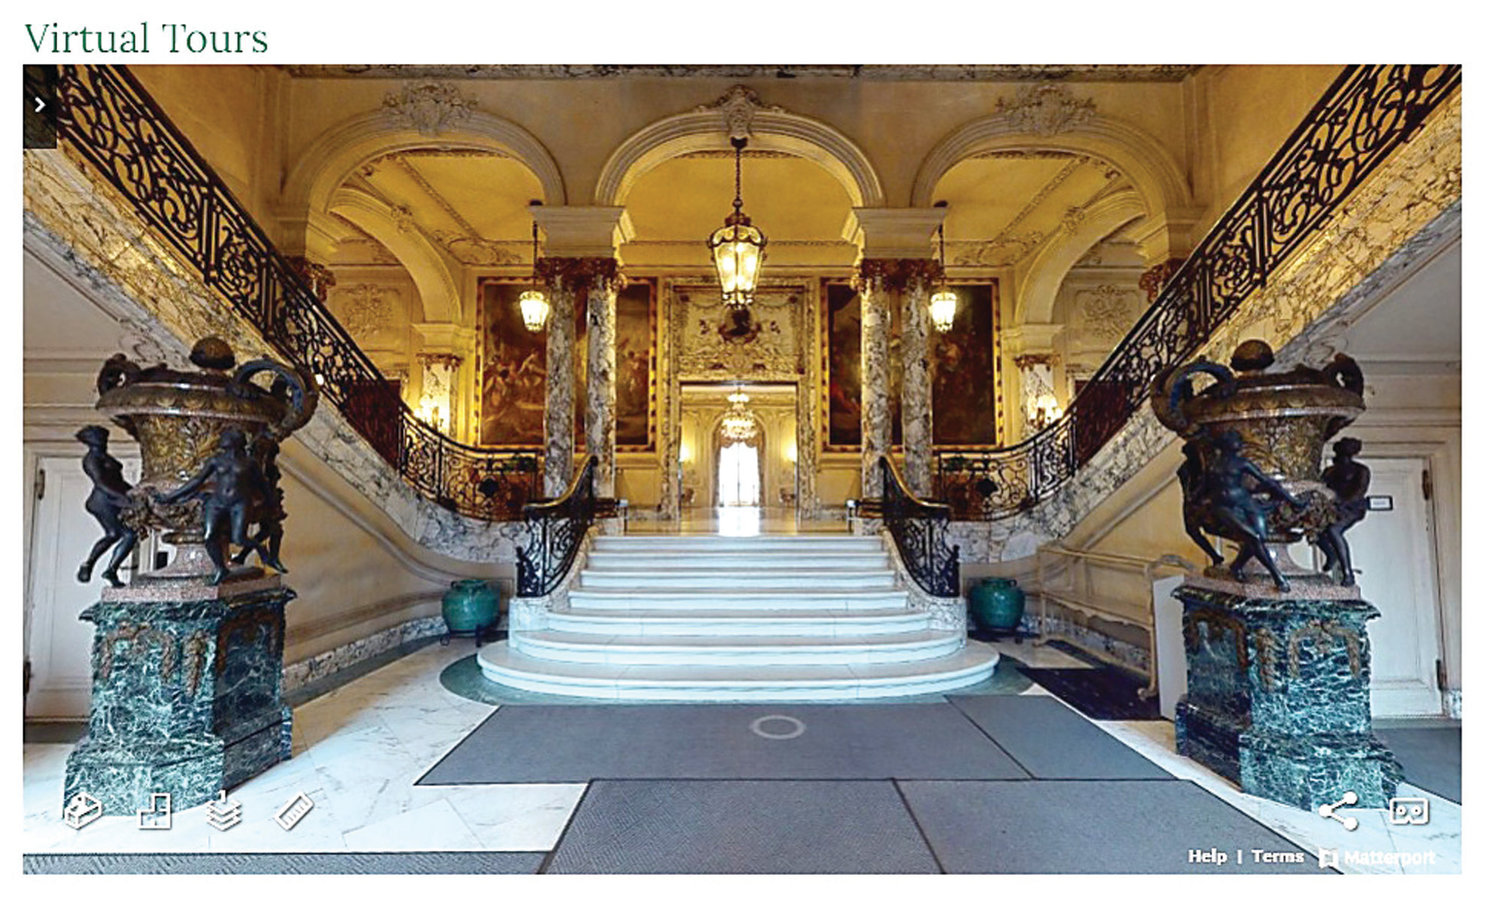 VIRTUAL TOURS:  Visitors to the Preservation Society’s website, NewportMansions.org, now can take self-guided 3-D tours through The Elms, Marble House, Isaac Bell House and Hunter House.